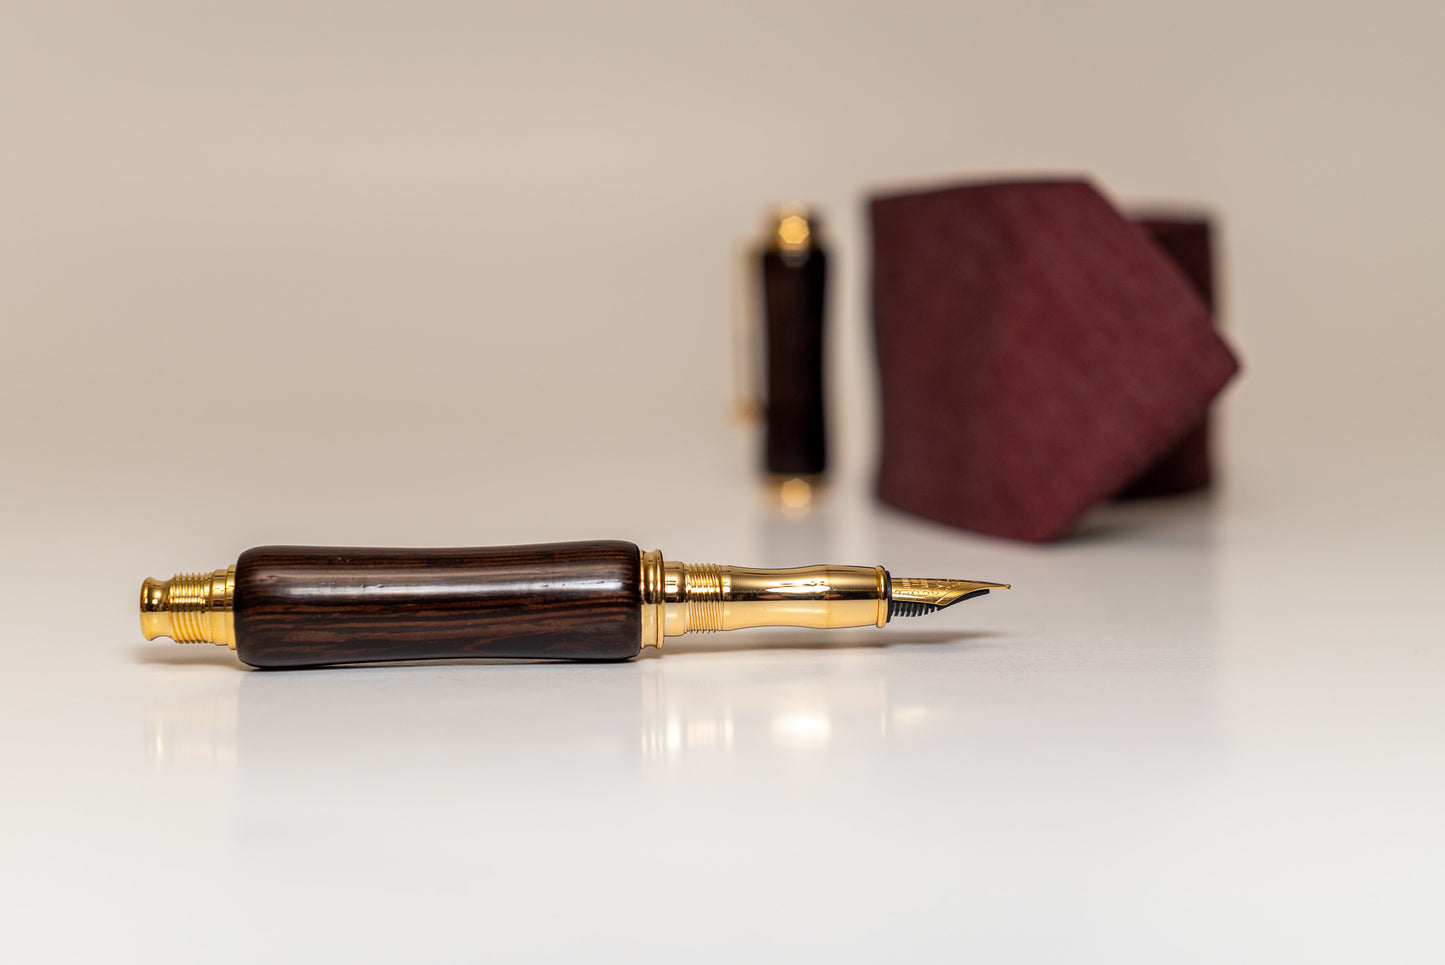 Wenge with Gold Hardware | Virage Fountain Pen